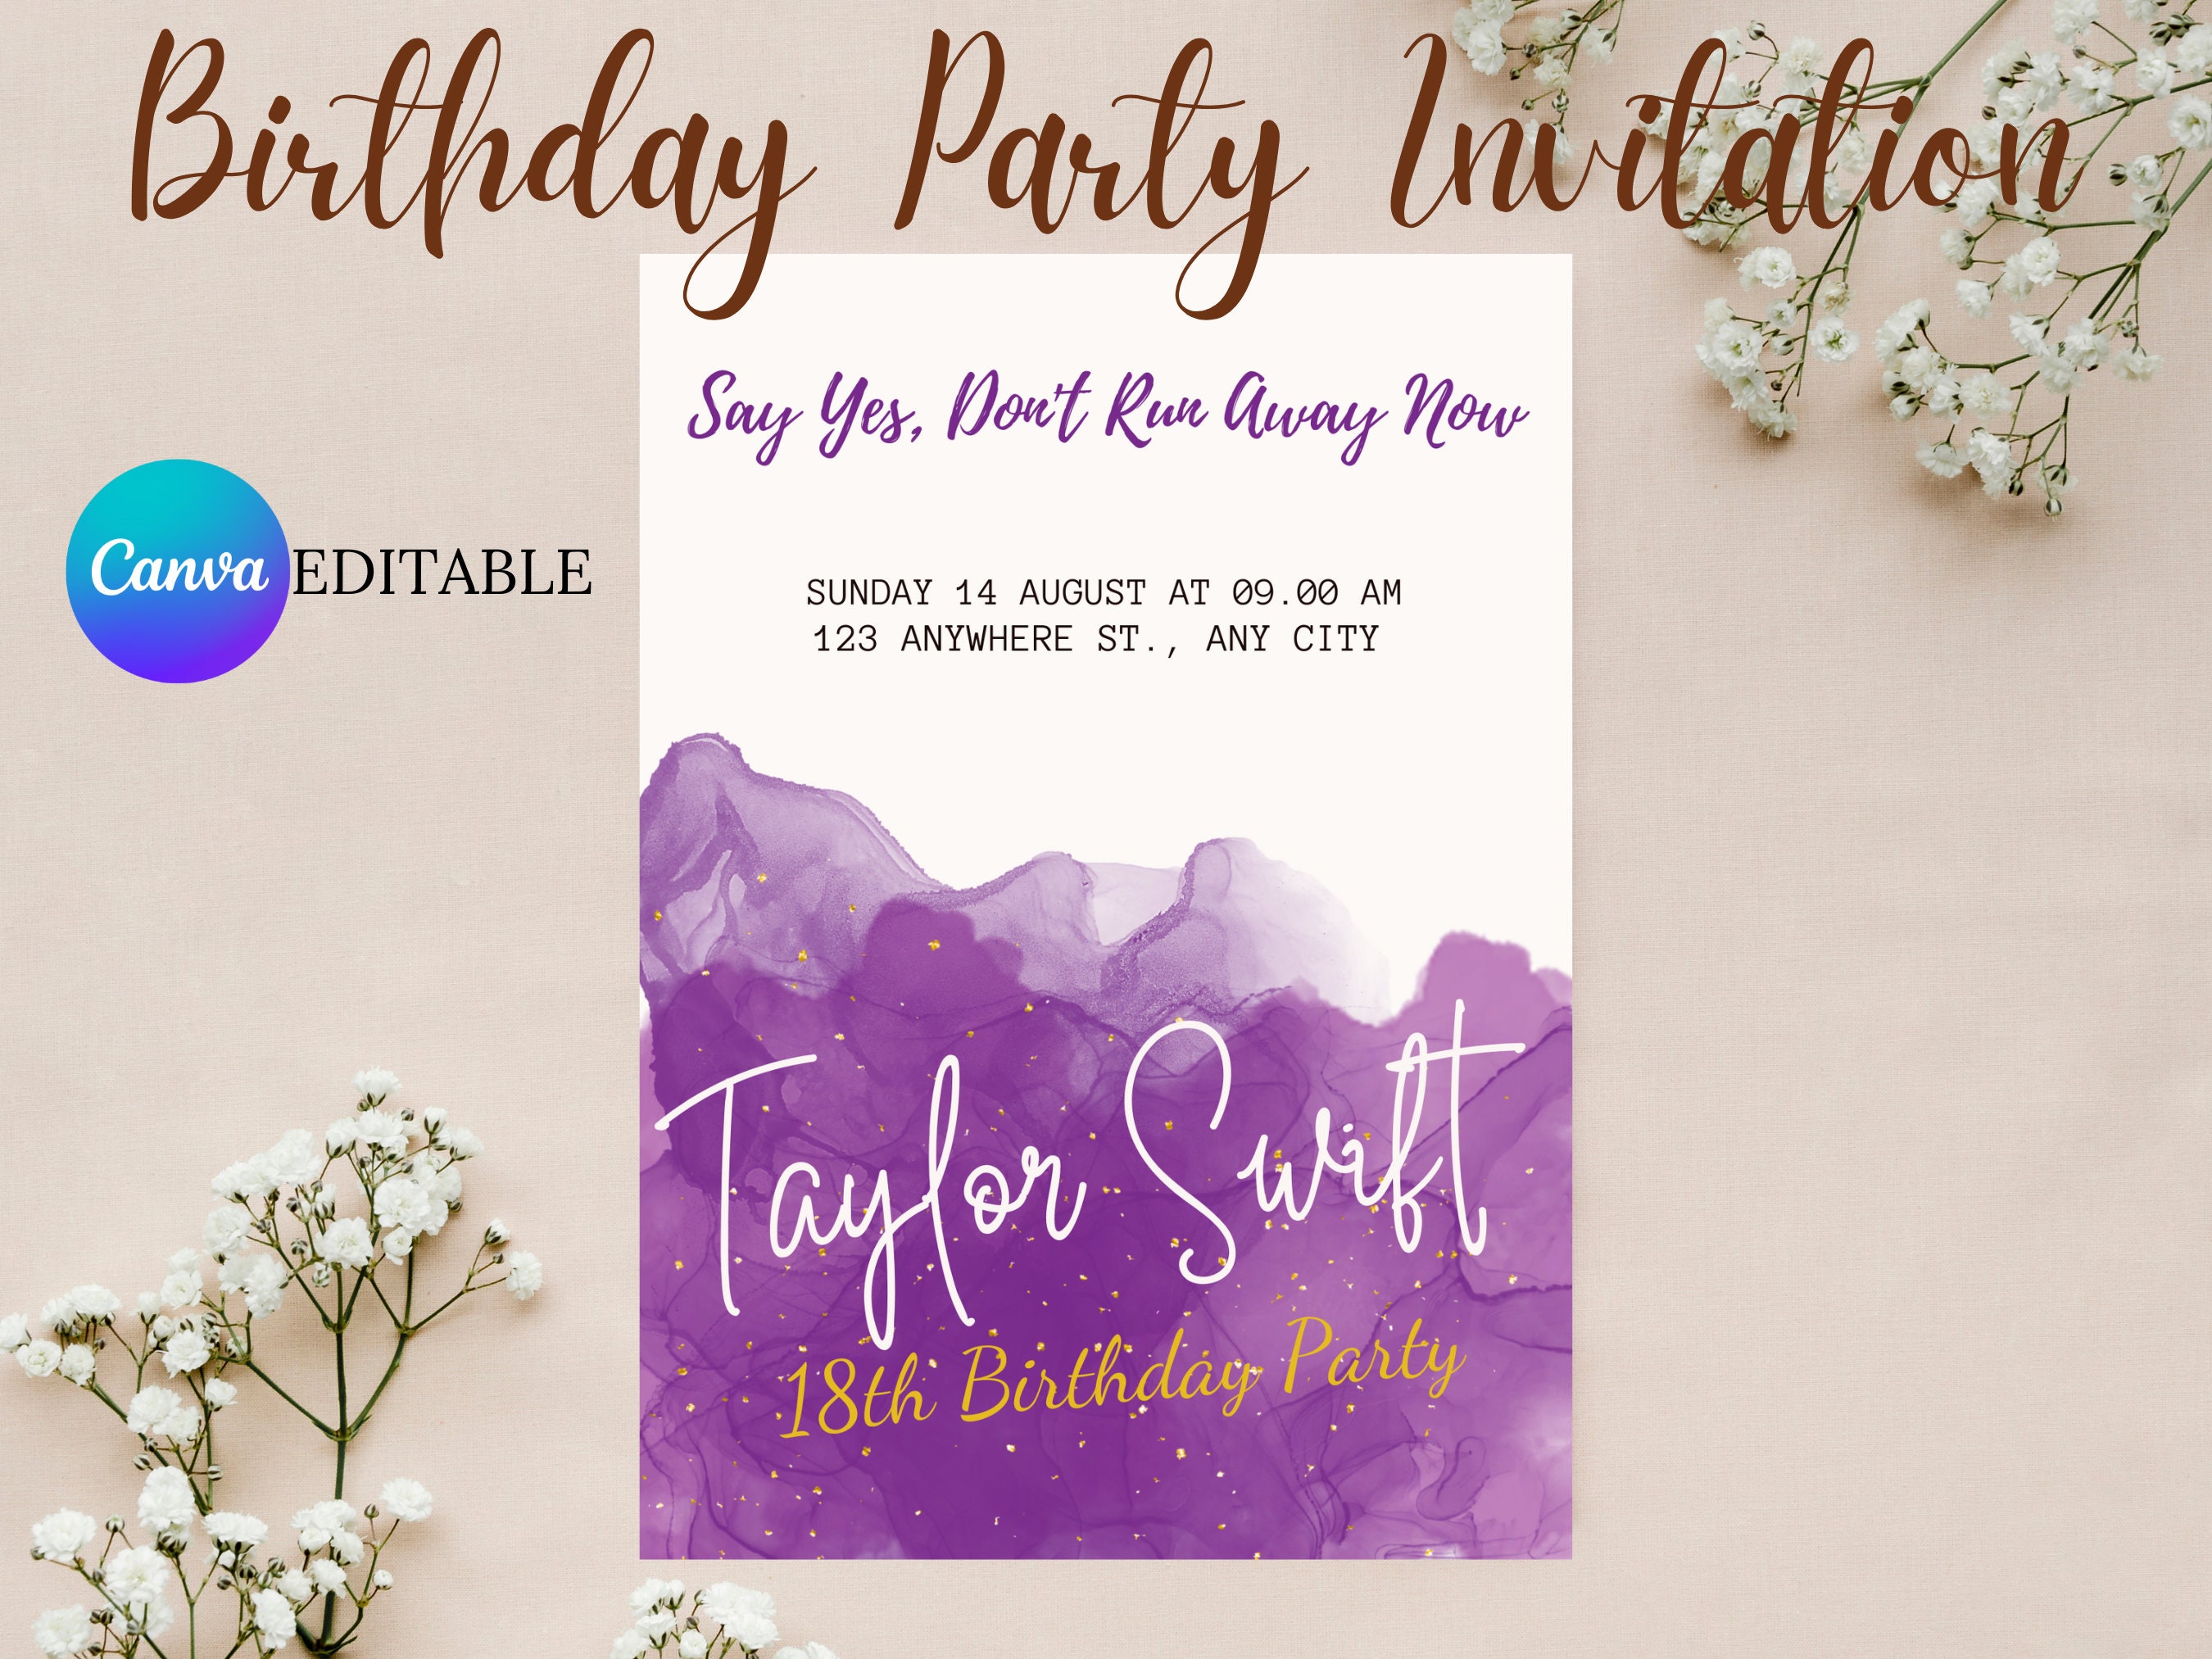 Printable Taylor Swift Party Cupcake Toppers TS Eras Speak Now Swifties  Taylor Swift Cupcake Toppers Swiftie Party Taylor Swift Decorations 